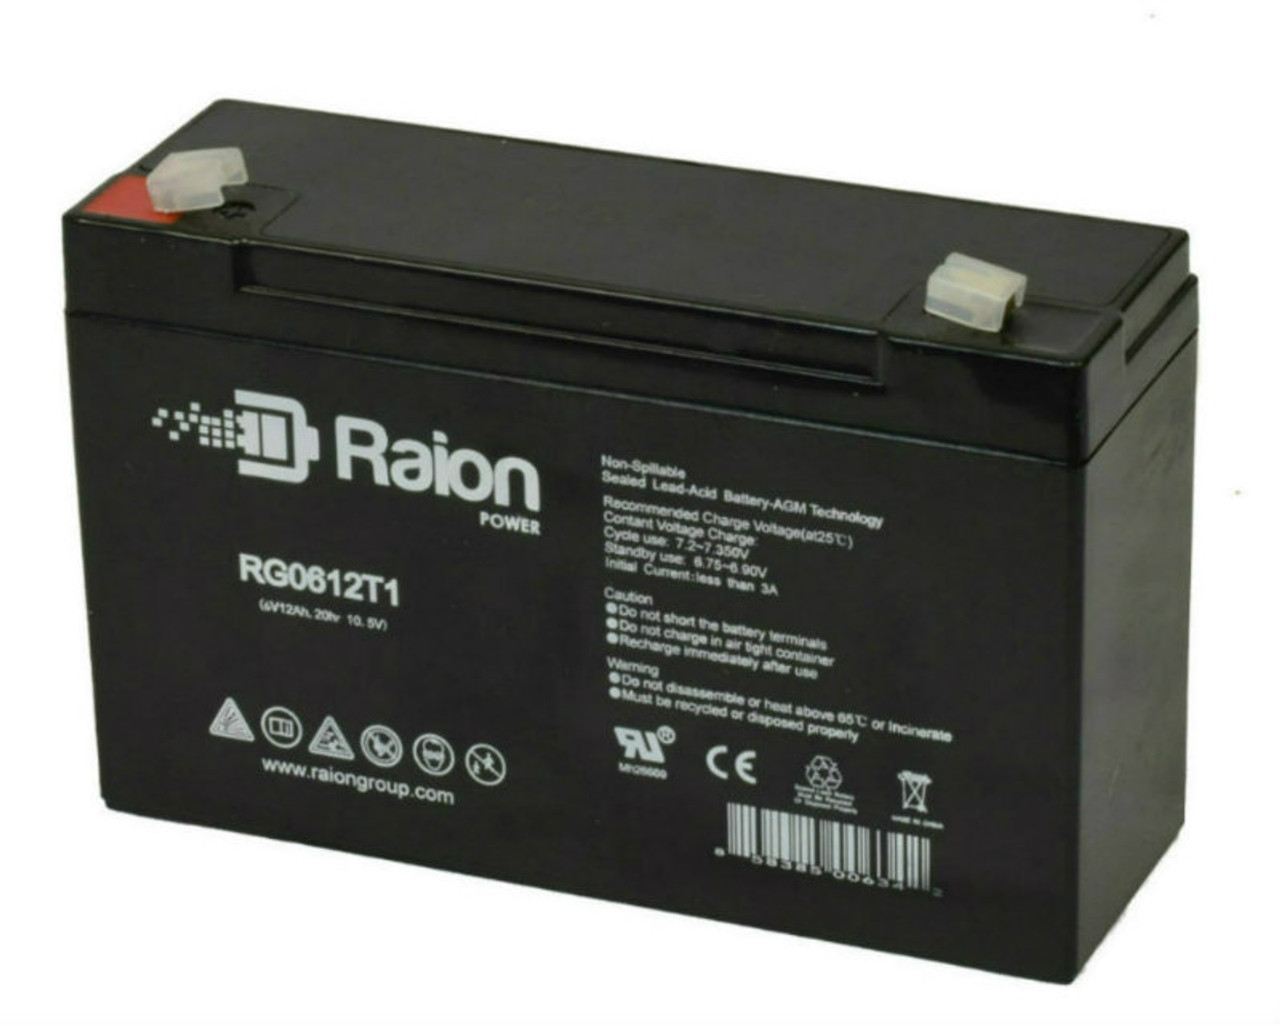 Raion Power RG06120T1 Replacement Battery for IMED 800 Series Infusion Pump Medical Equipment